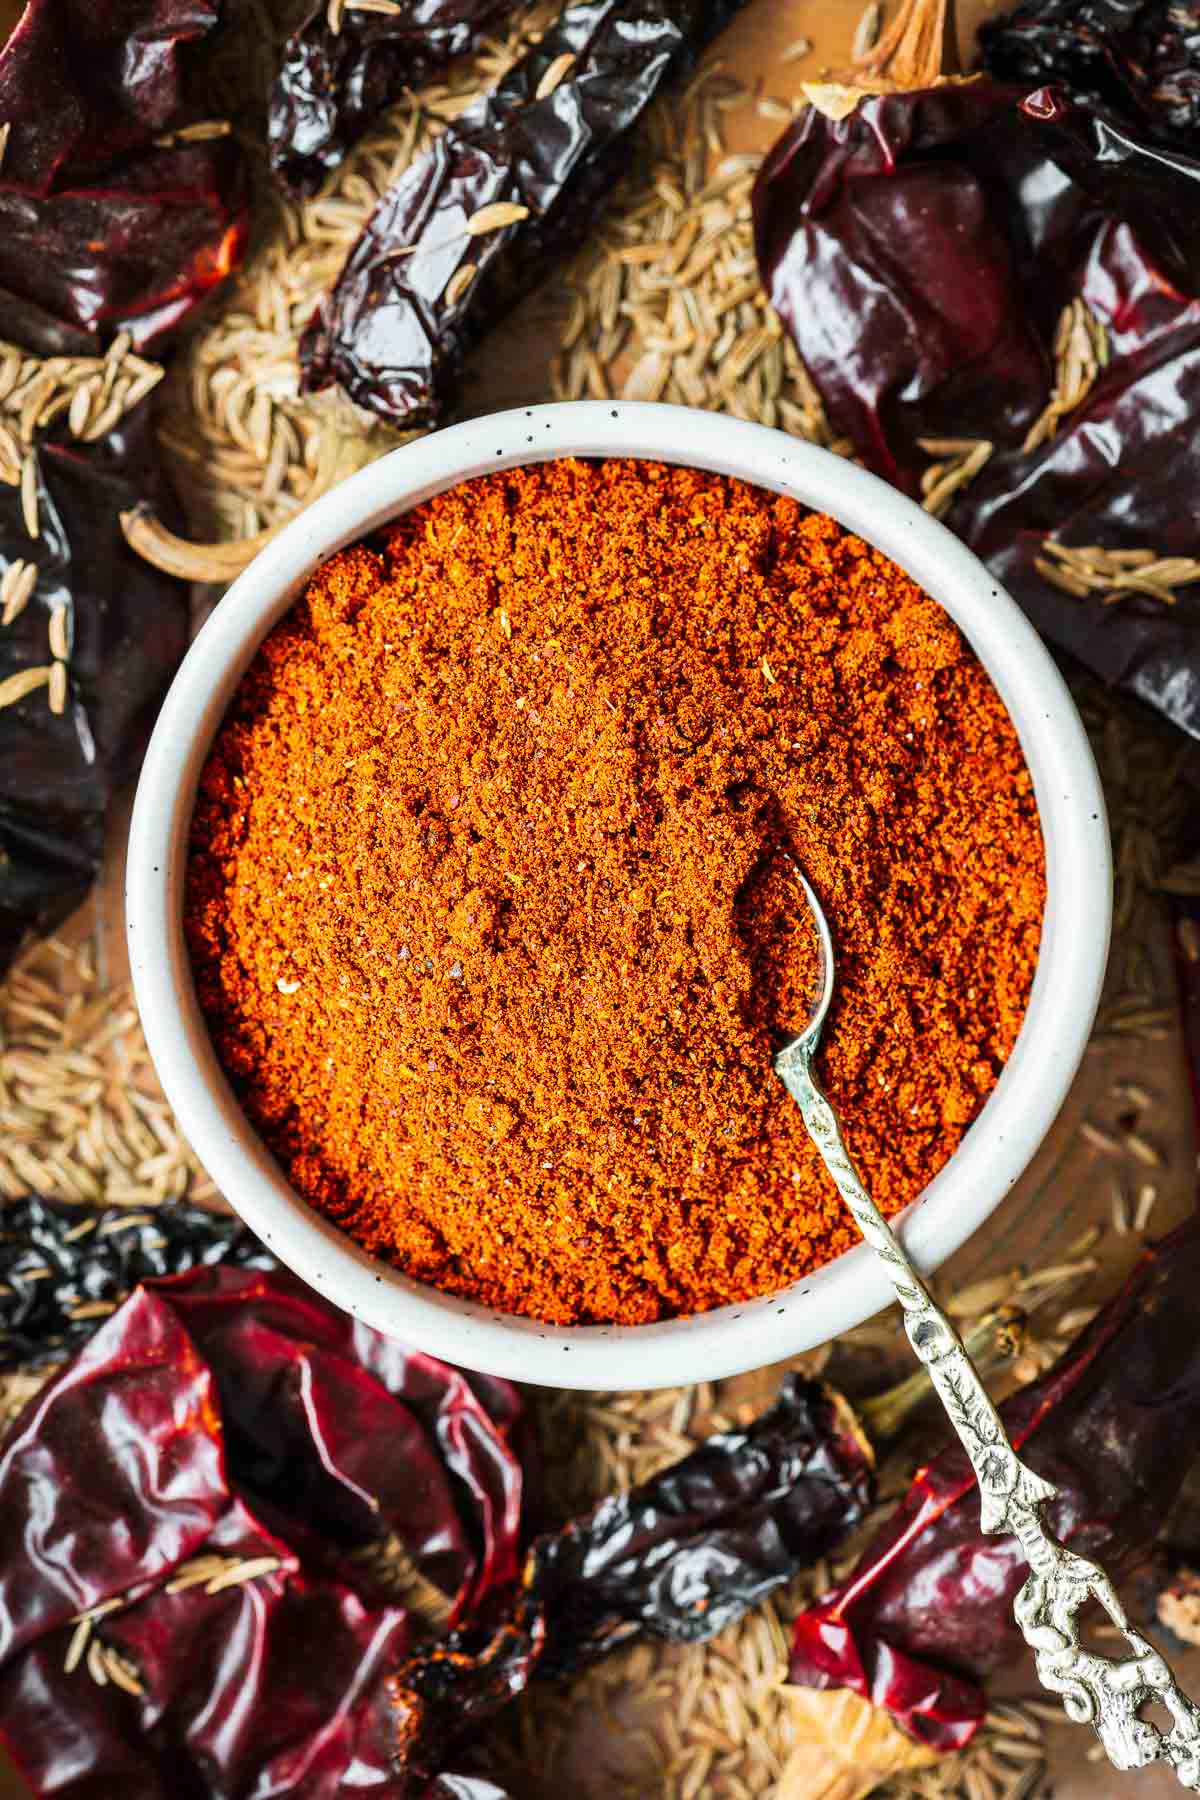 A bowl of harissa powder with a small spoon surrounded by dried chilies and spices.